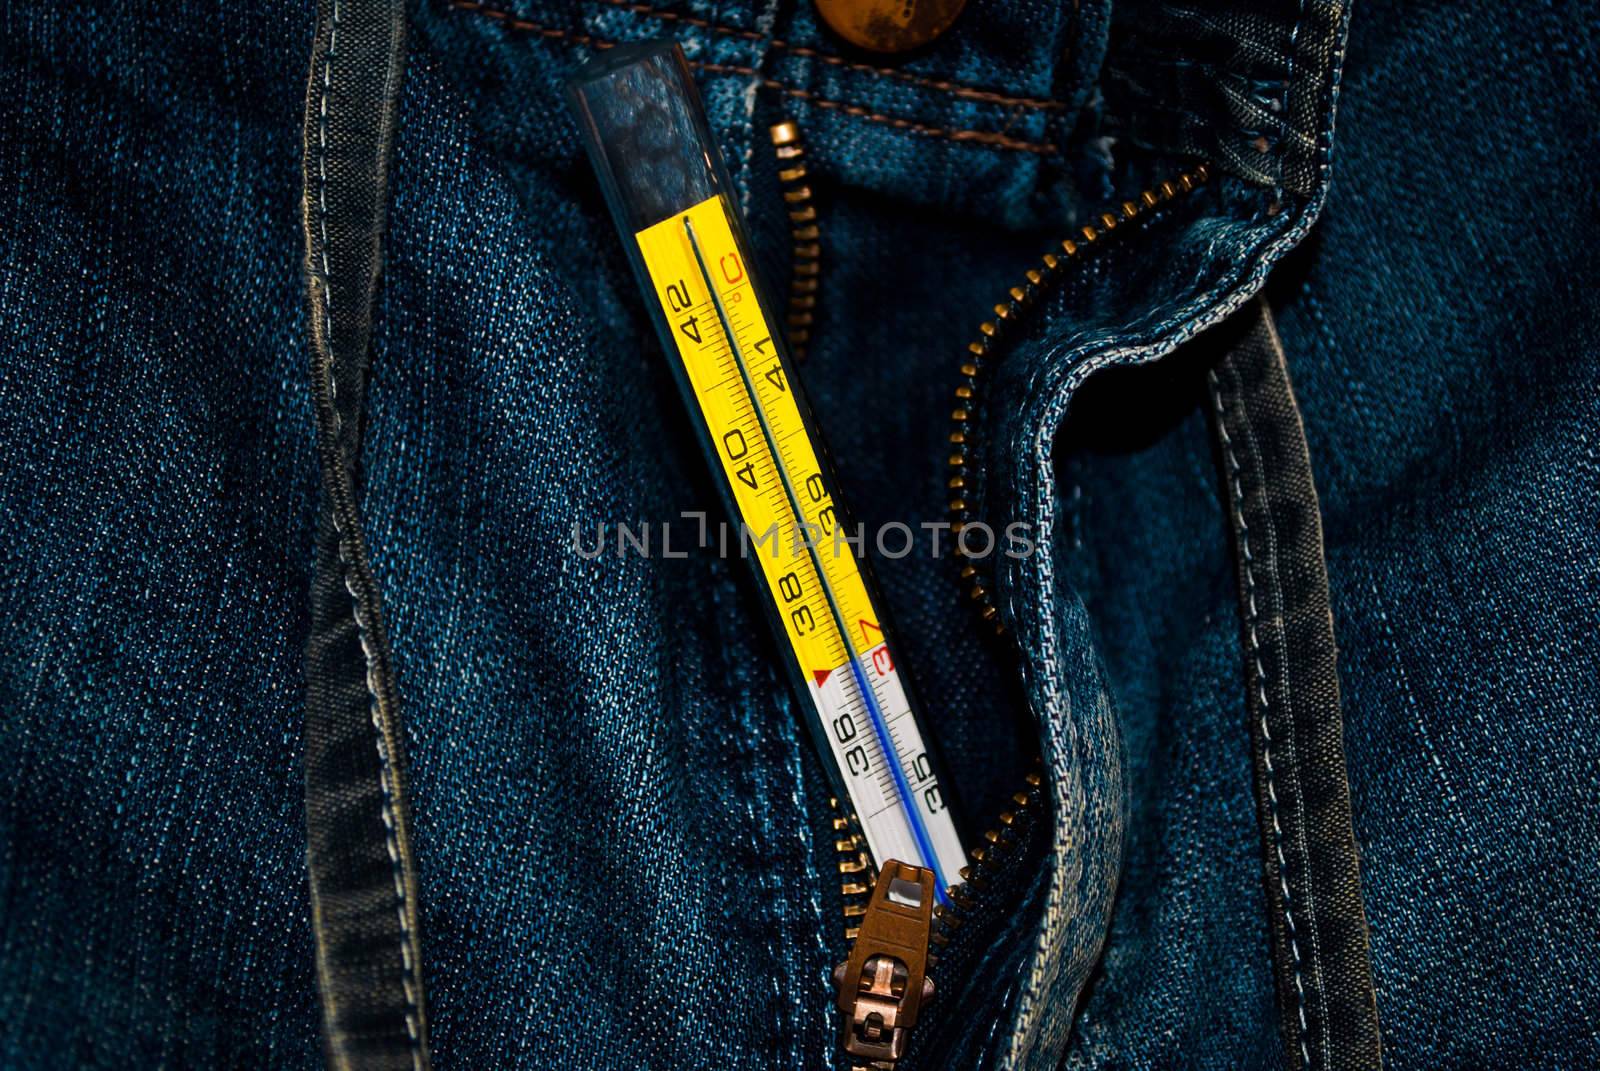 Crotch measurement with thermometer by betterinall